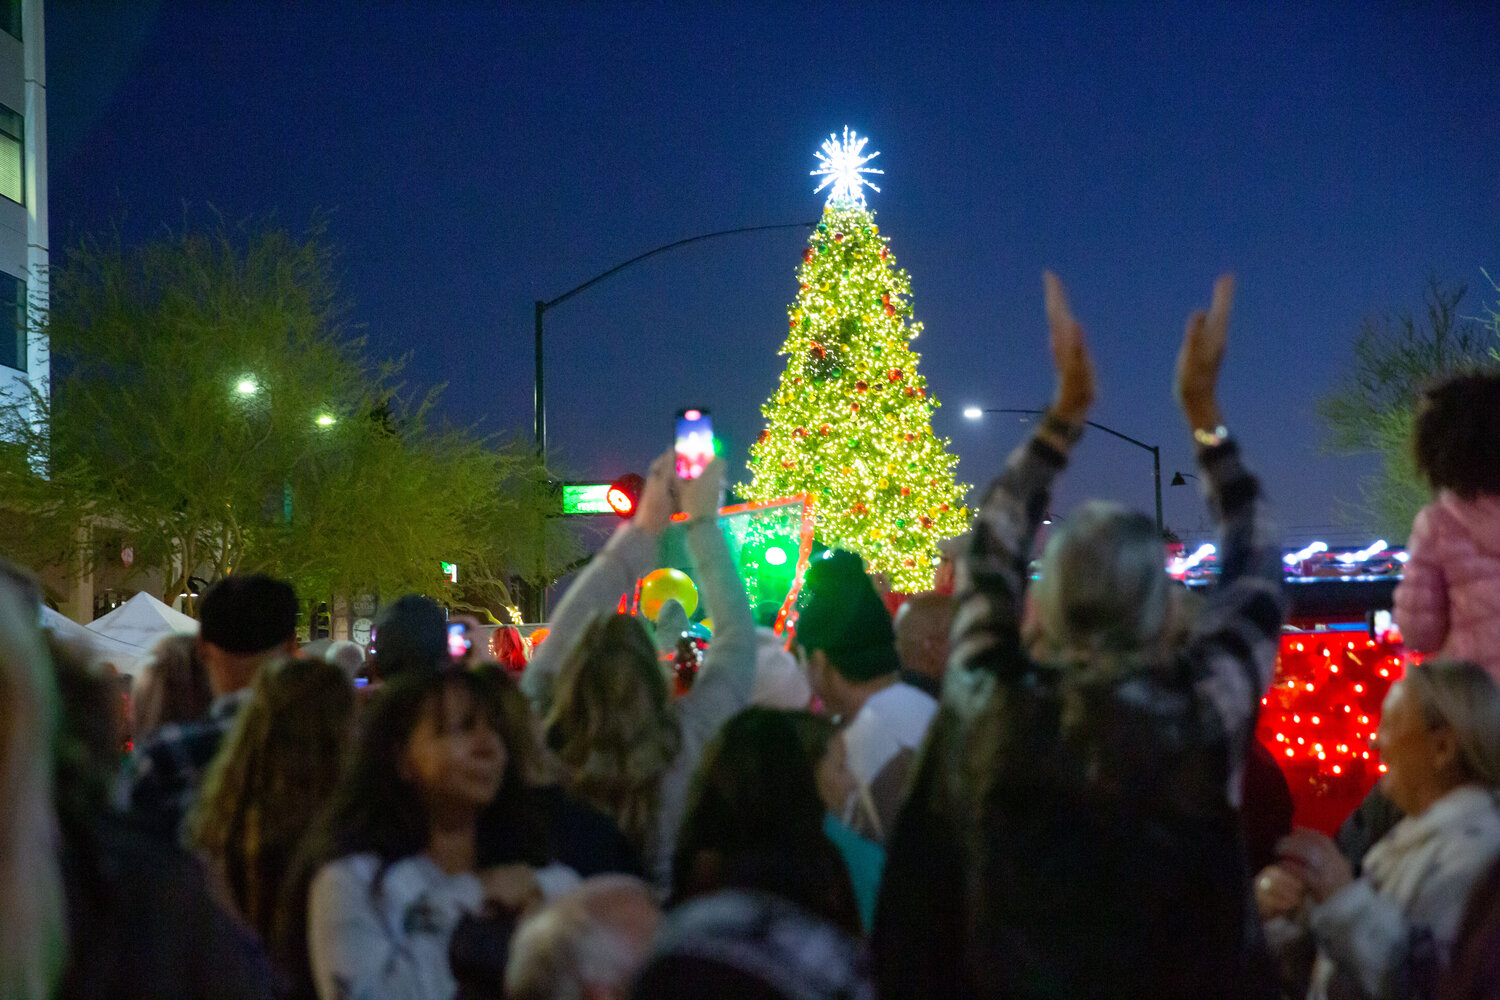 Merry Main Street celebrates the start of the holiday season in Mesa. Activities kick off with the lighting of Mesa’s nearly four-story Christmas tree.